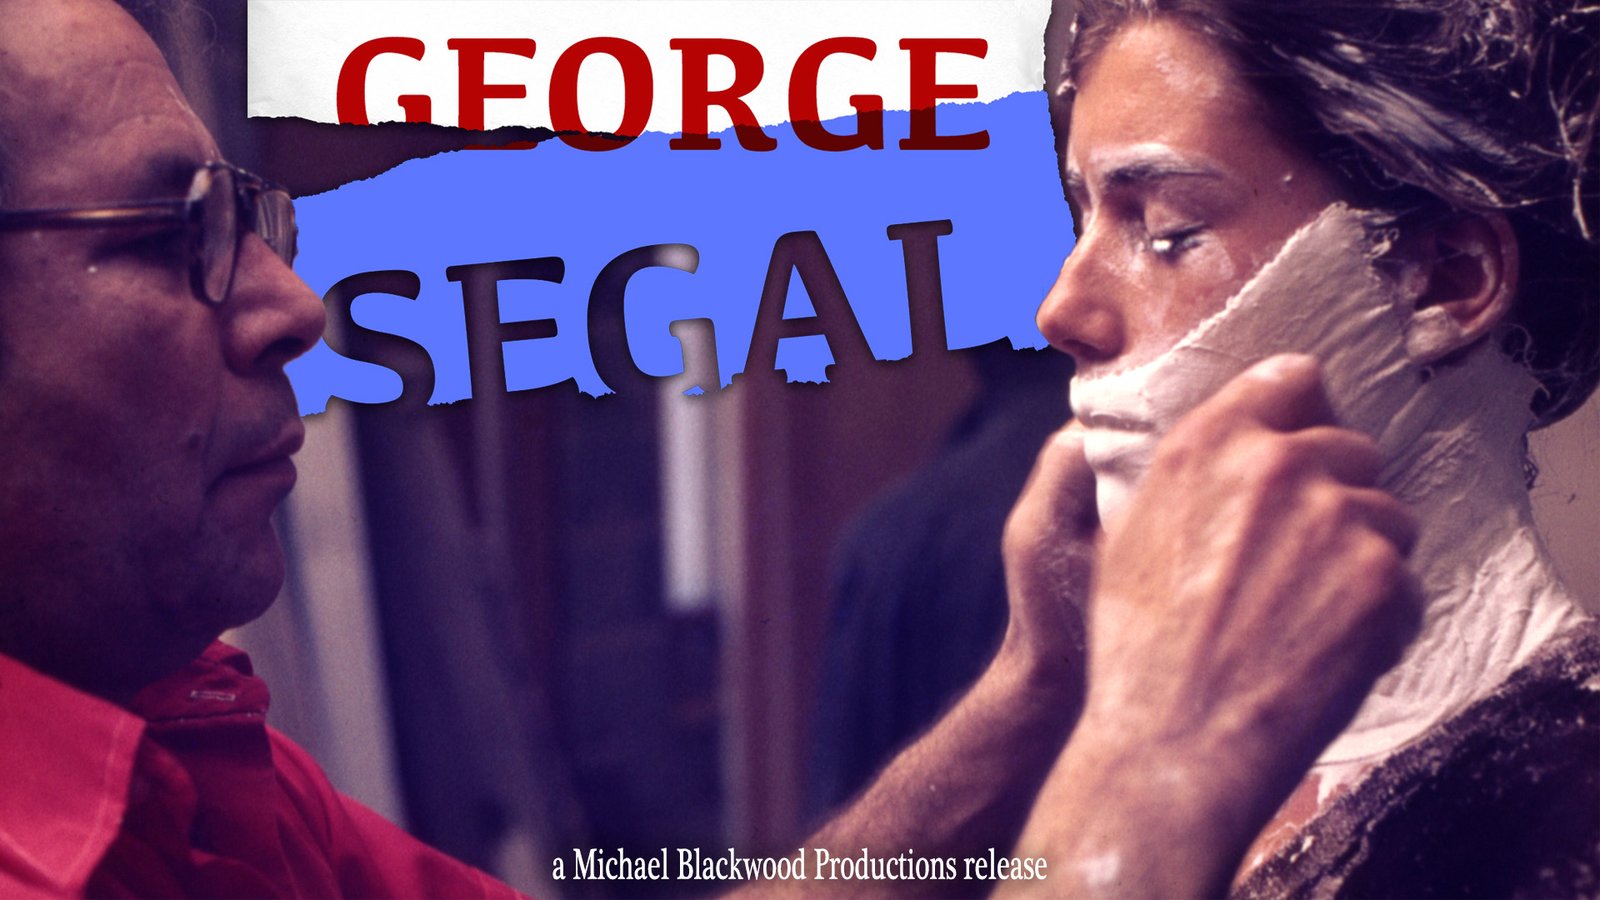 George Segal - The Work of an American Sculptor